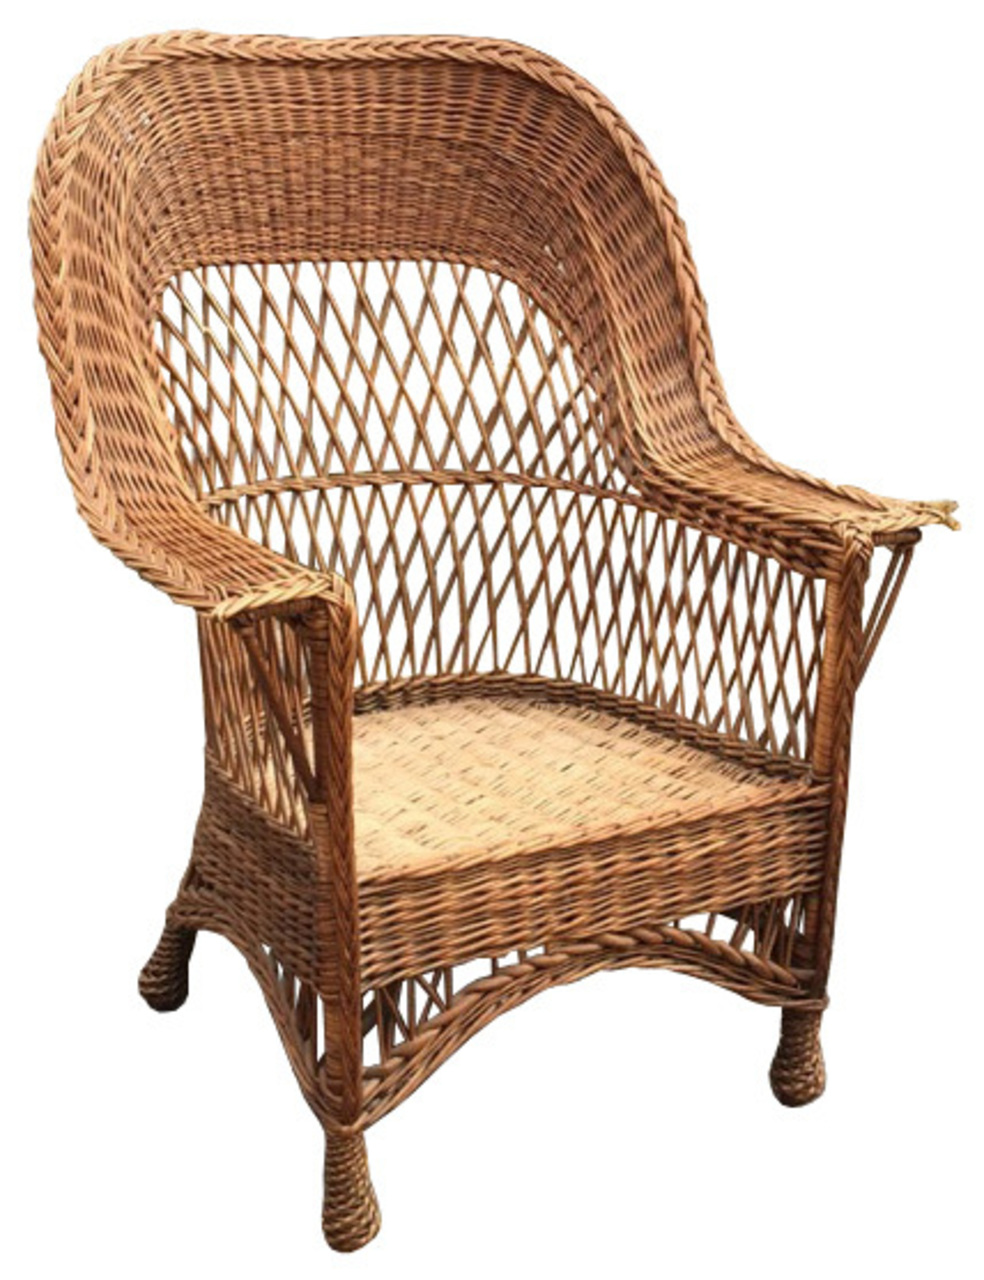 Antique Wicker Chair The, Antique Wicker Chairs Uk